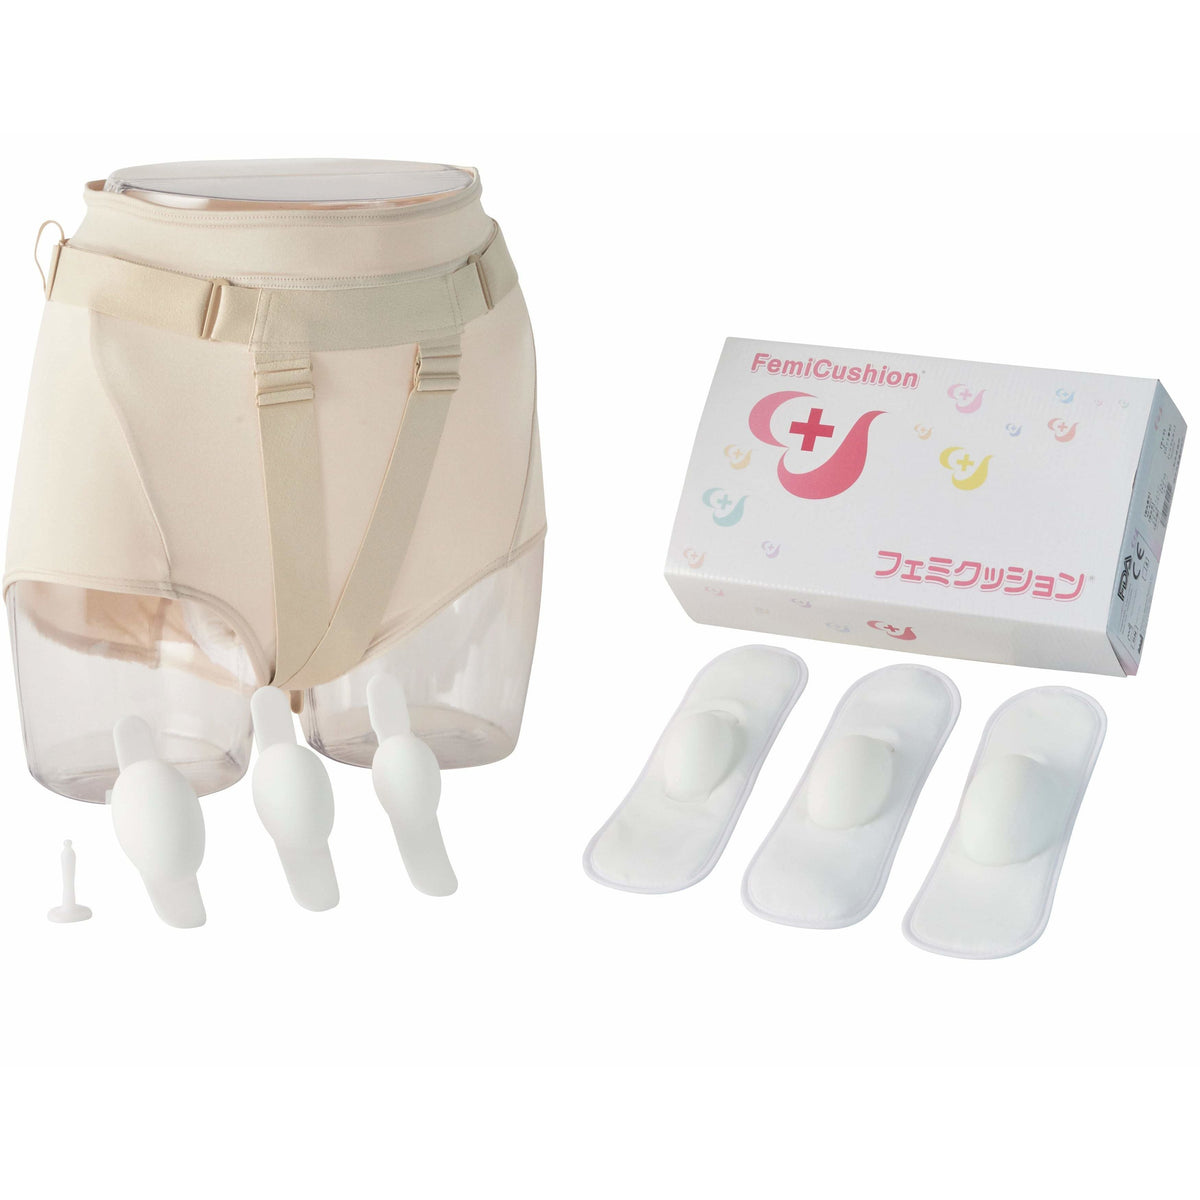 miniCushion Pelvic Support - Body Support Systems, Inc